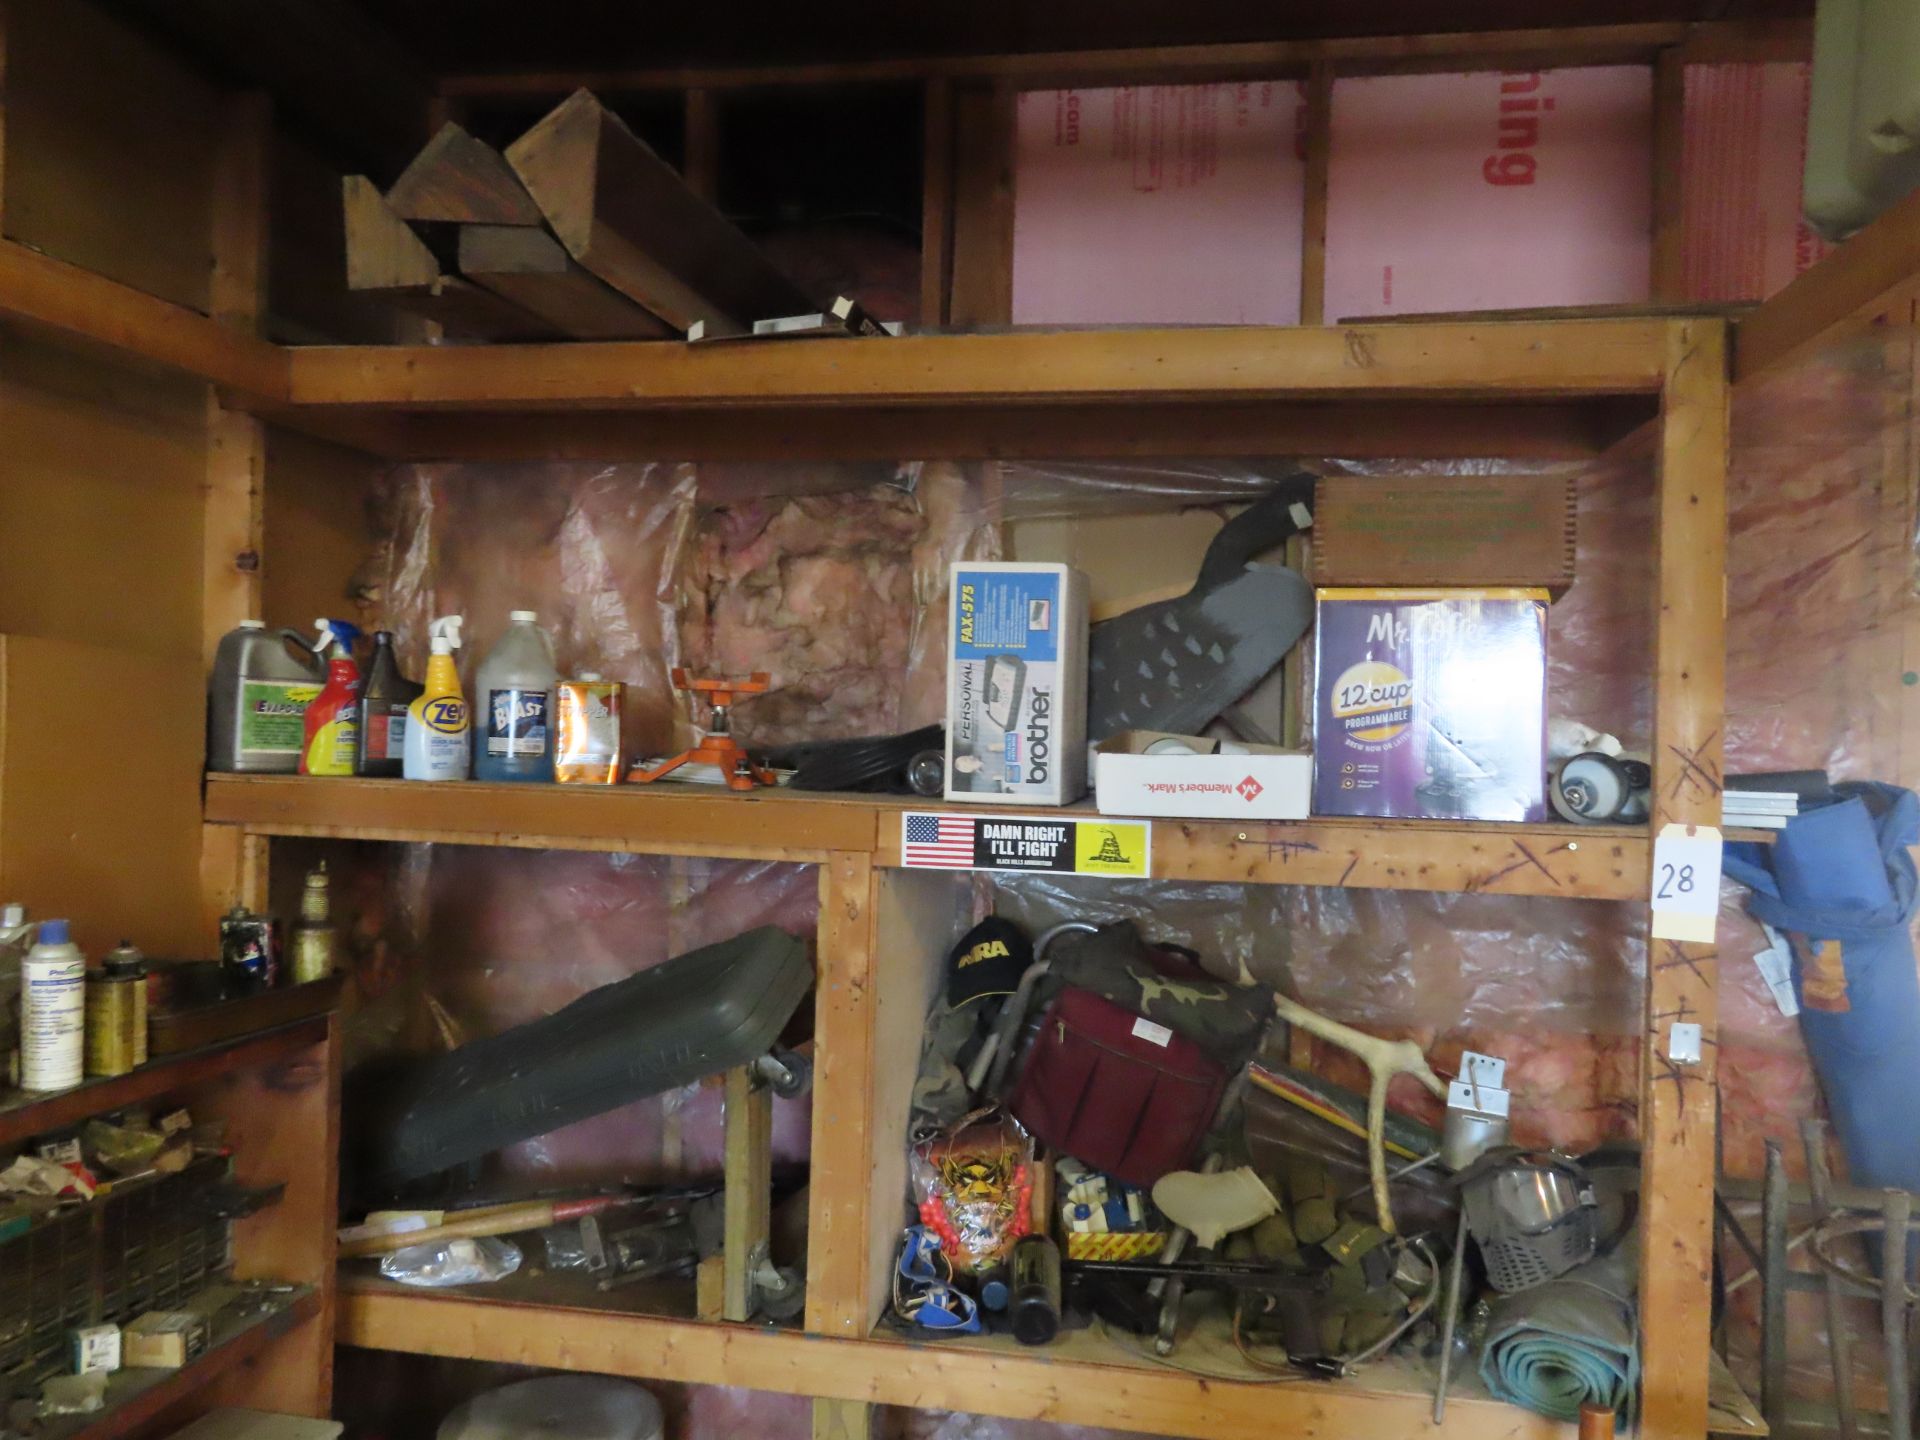 Contents of Wooden Shelf, Paint Ball Gun, Jack Stand and other items - Image 2 of 9